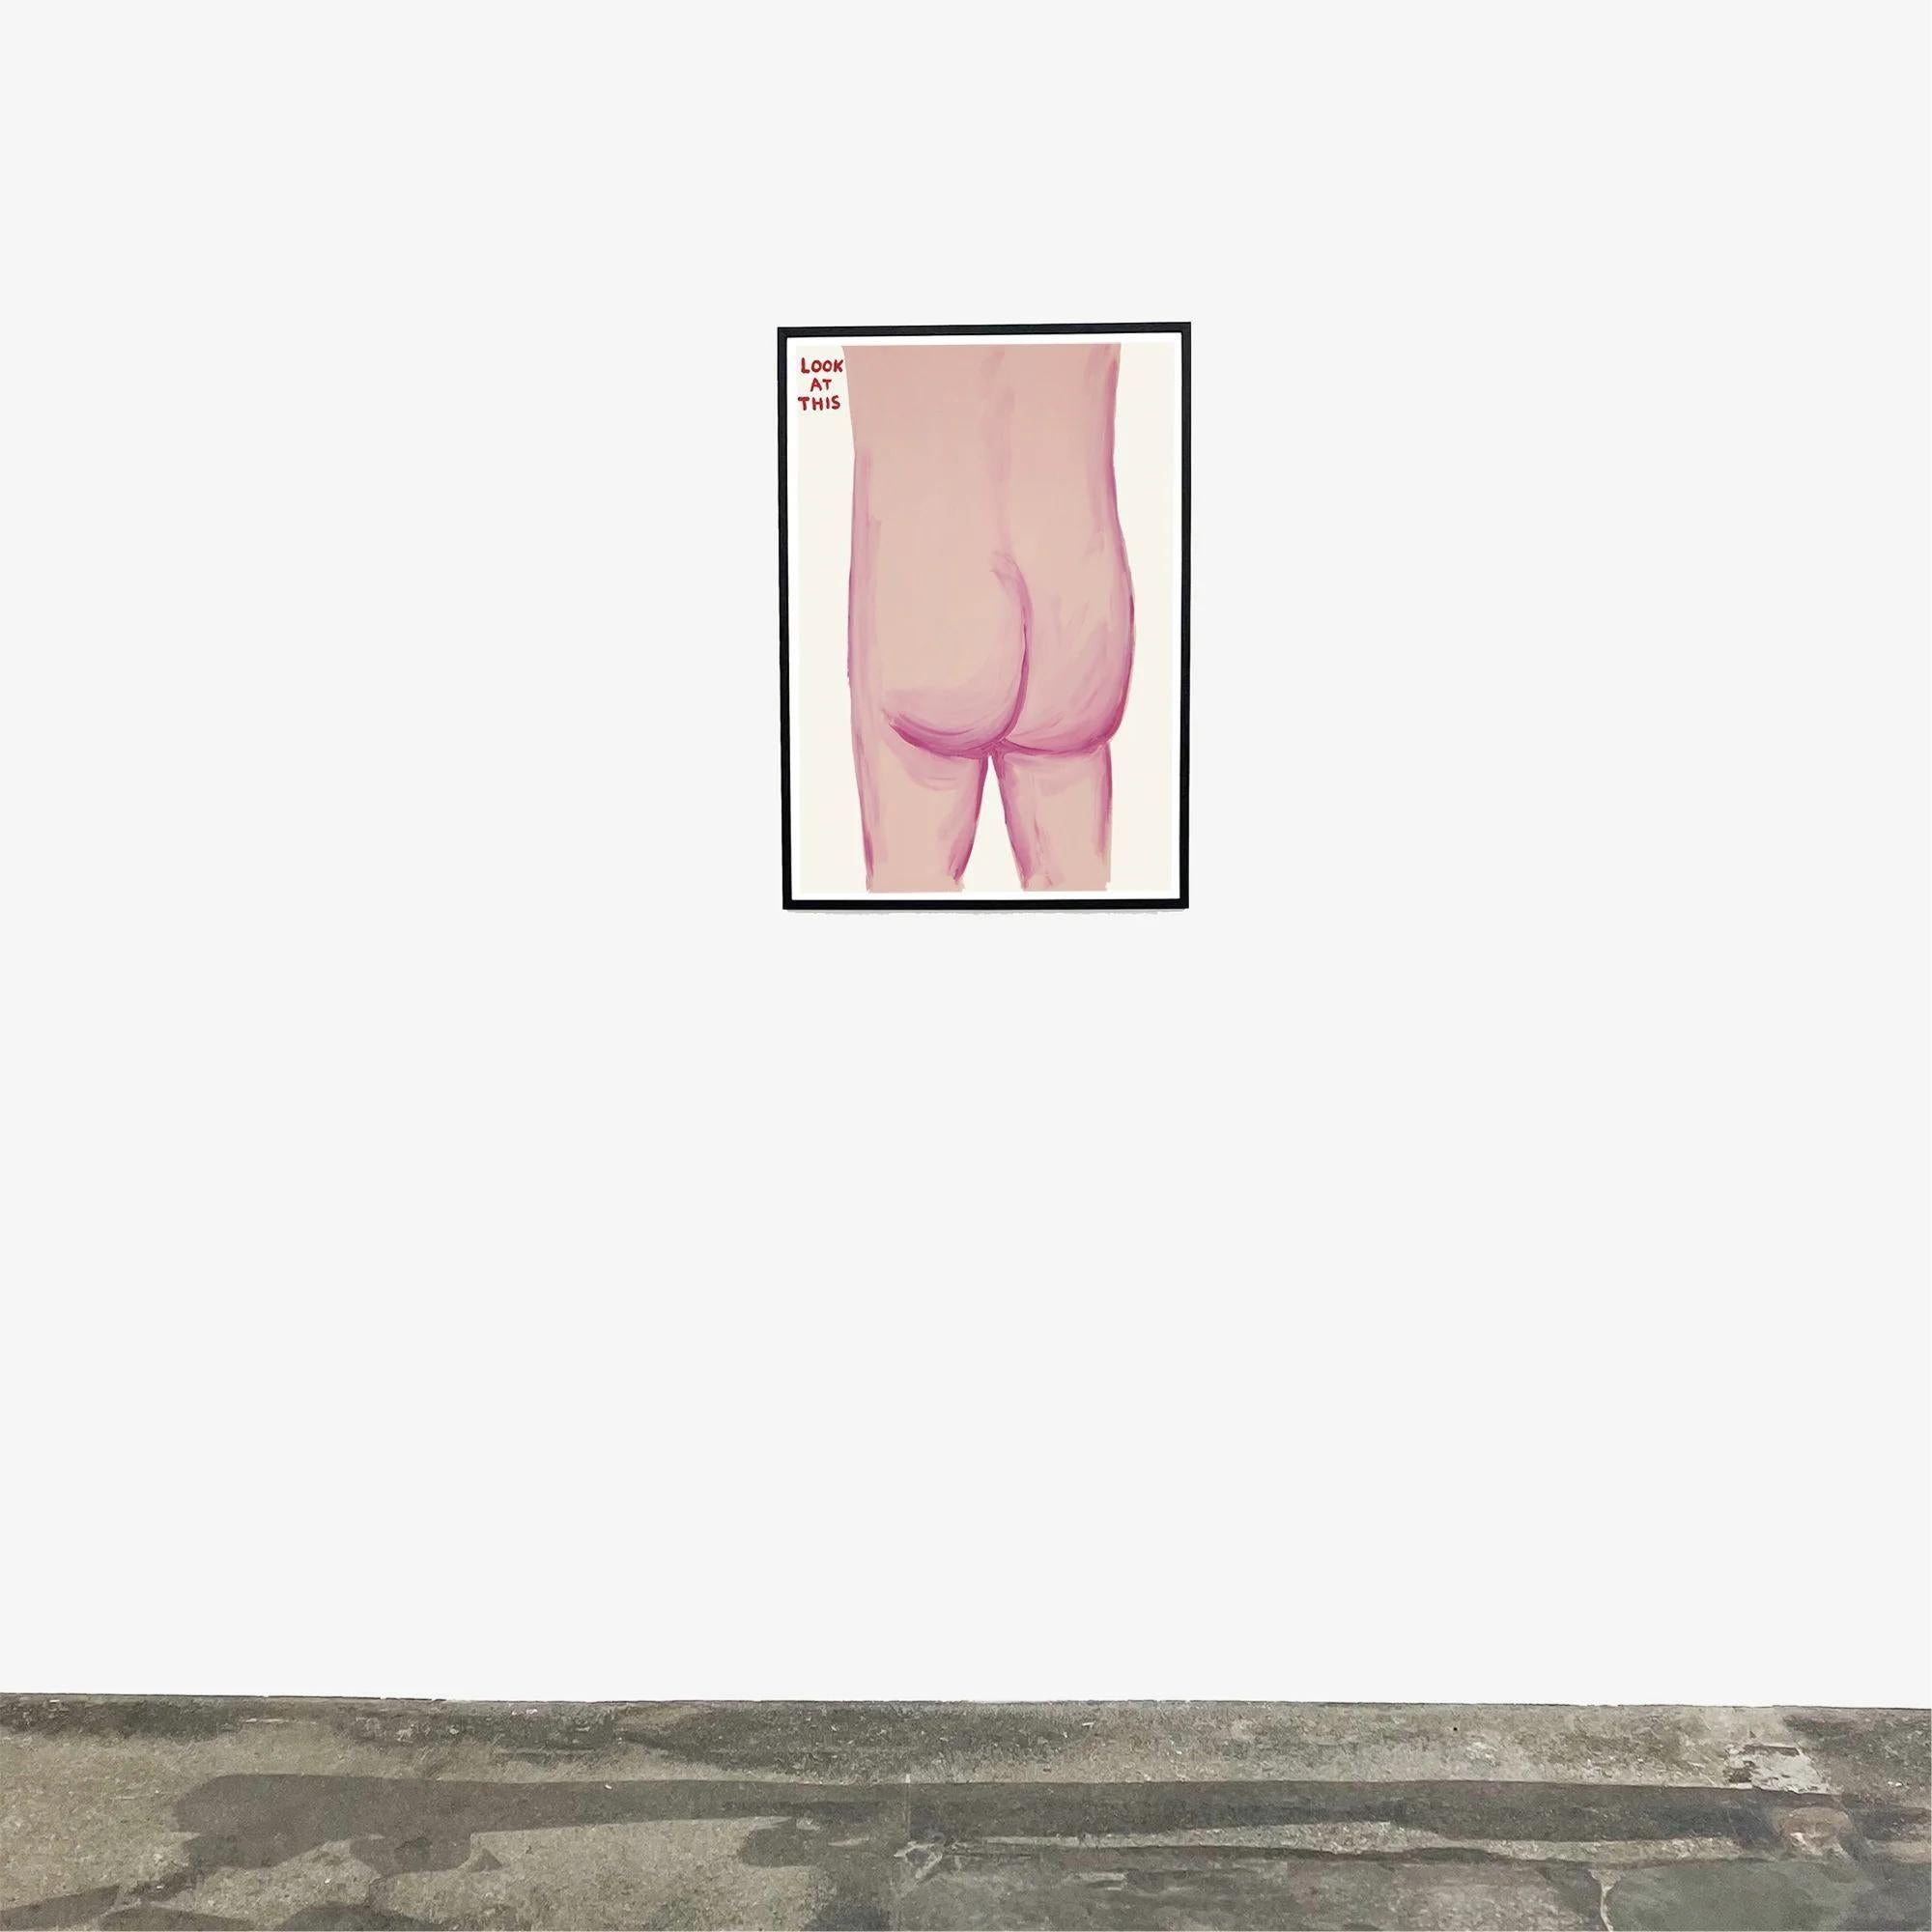 Look At This - Contemporary Print by David Shrigley